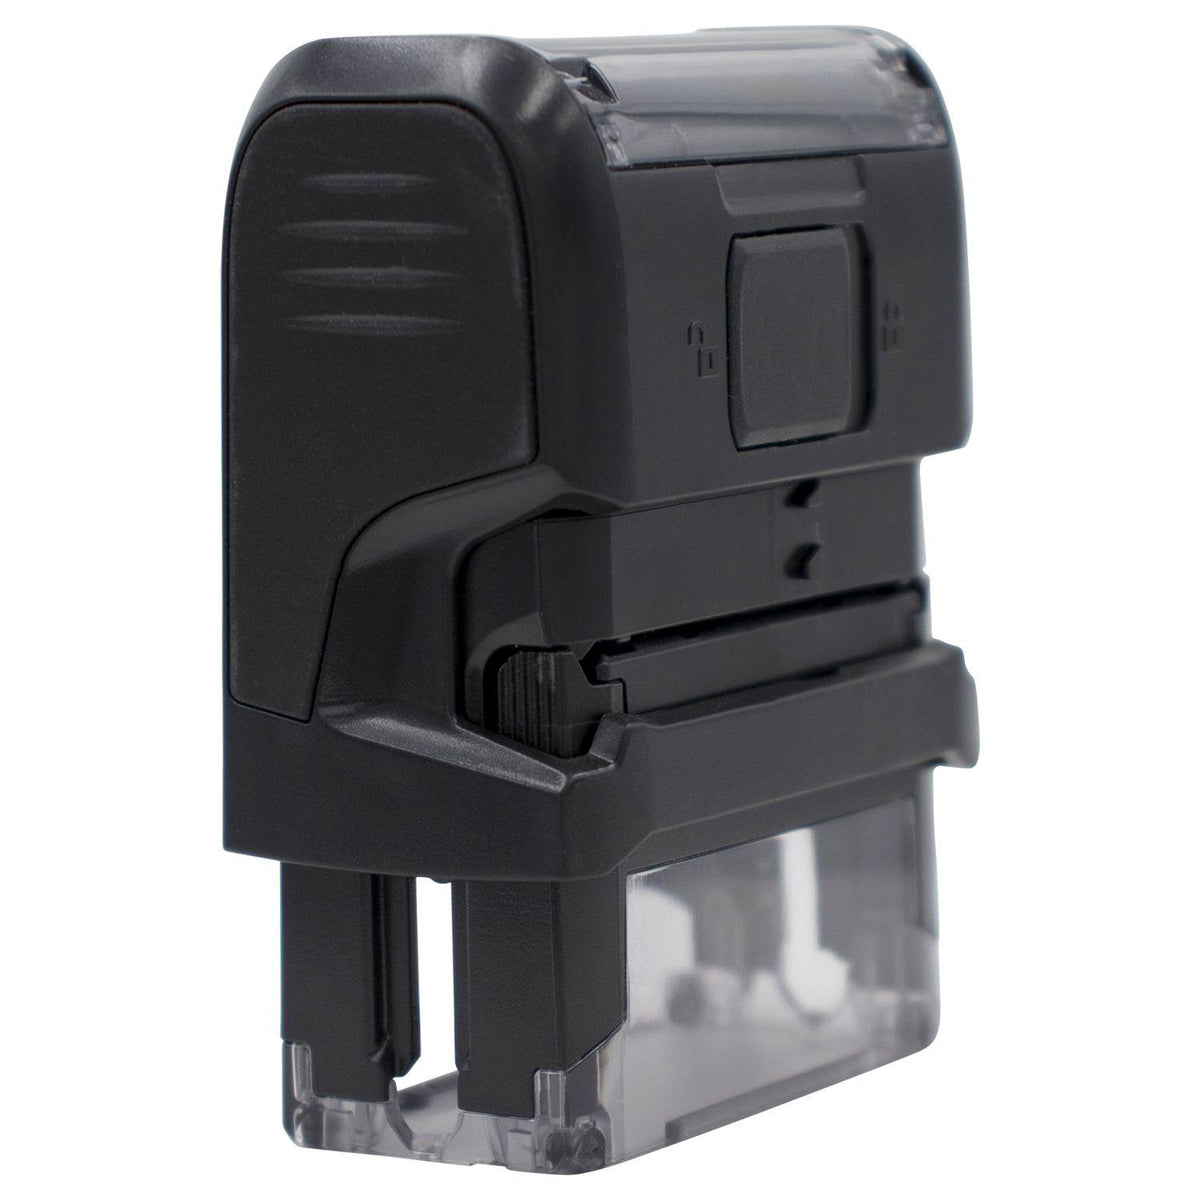 Self-Inking Borrador Stamp - Engineer Seal Stamps - Brand_Trodat, Impression Size_Small, Stamp Type_Self-Inking Stamp, Type of Use_General, Type of Use_Office